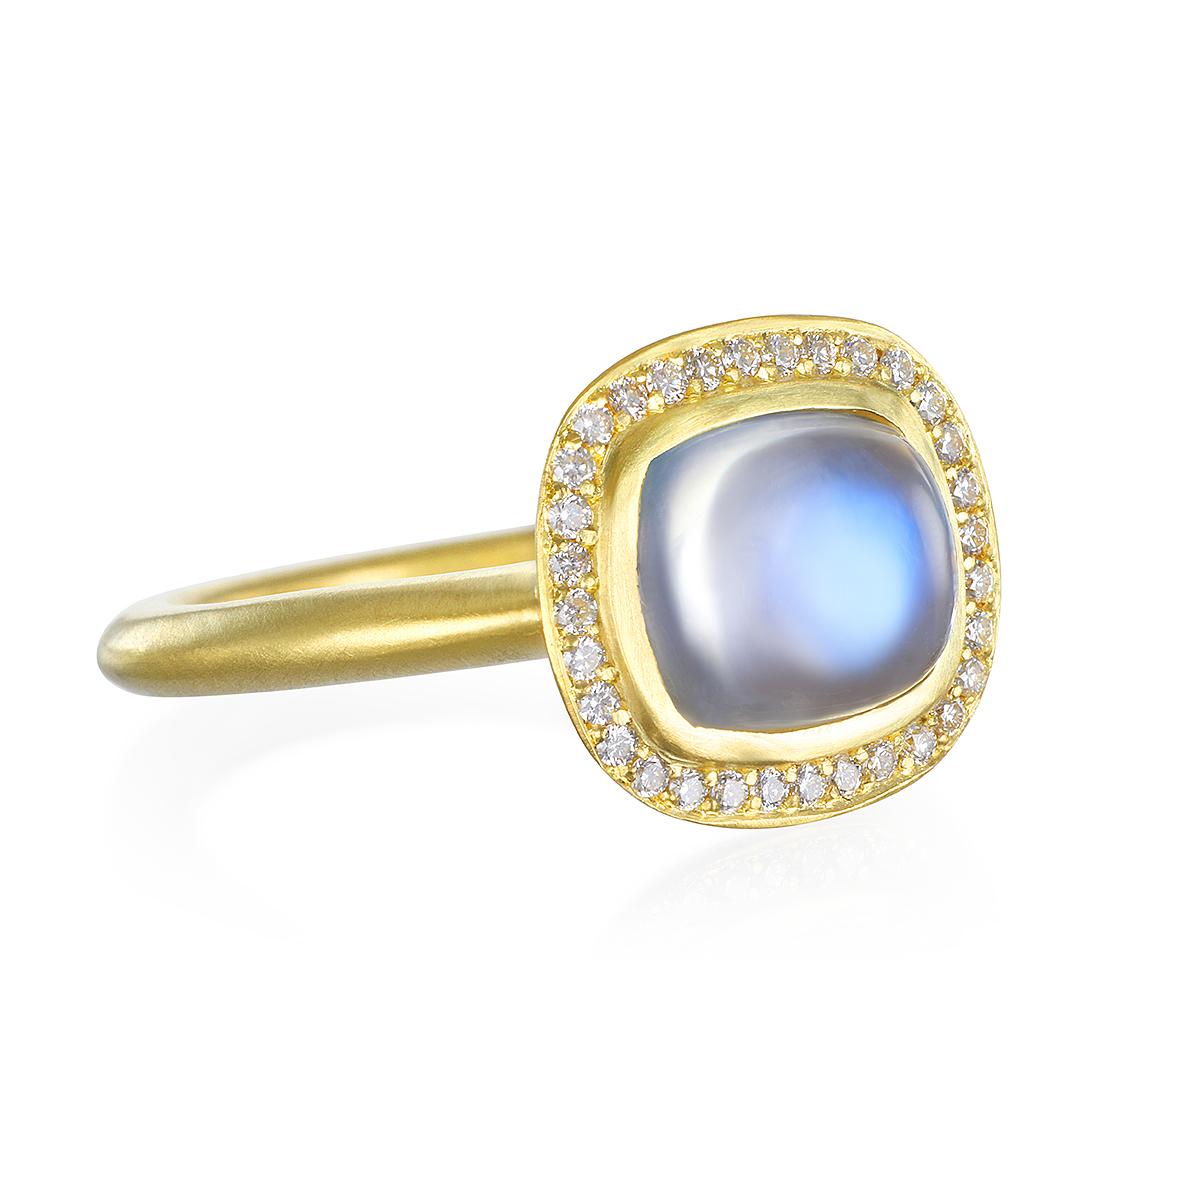 This beautiful Moonstone Bezel Ring is full of light and reflects beautiful translucent blue hues. The shape, polish, and matte gold enhances the moonstones striking rainbow effect. Complete with a Diamond halo for extra sparkle.

Handcrafted in 18k